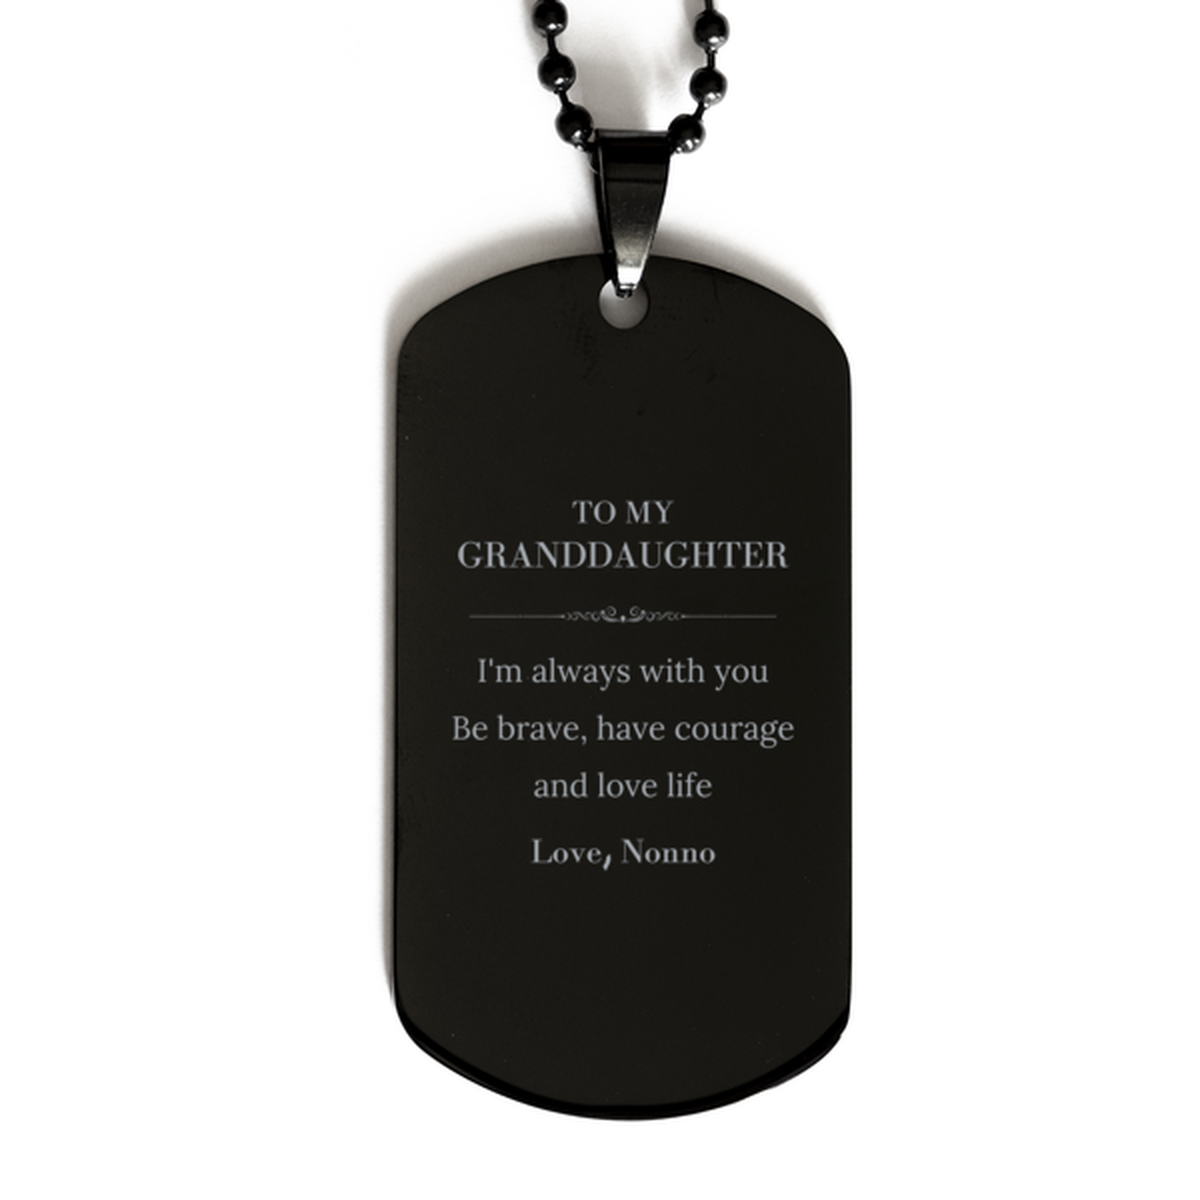 To My Granddaughter Gifts from Nonno, Unique Black Dog Tag Inspirational Christmas Birthday Graduation Gifts for Granddaughter I'm always with you. Be brave, have courage and love life. Love, Nonno